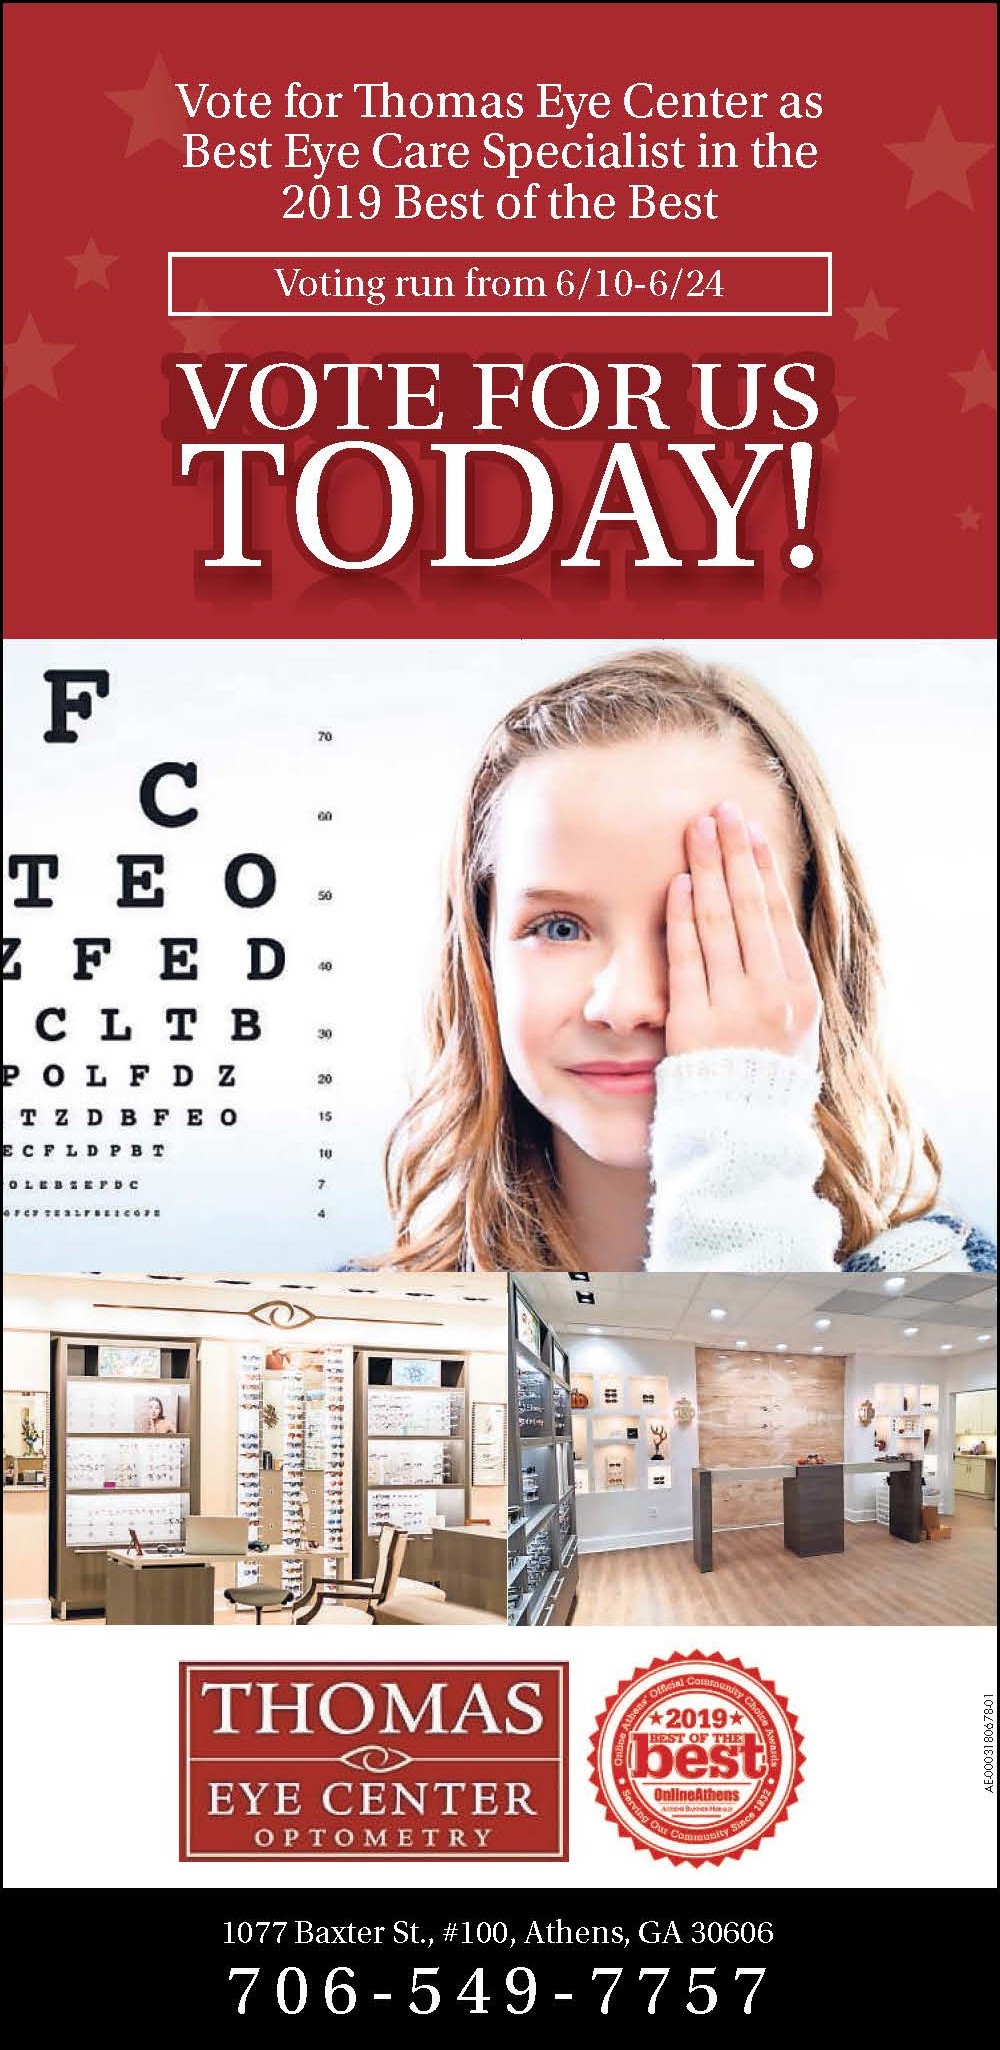 Vote for Thomas Eye Center as Best Eye Care Specilaist in the 2019 Best of the Best. Voting run from 6/10-6/24. Vote for us Today! Thomas Eye Center 1077 Baxter Street Suite 100 Athens, Georgia 30606. 706-549-7757